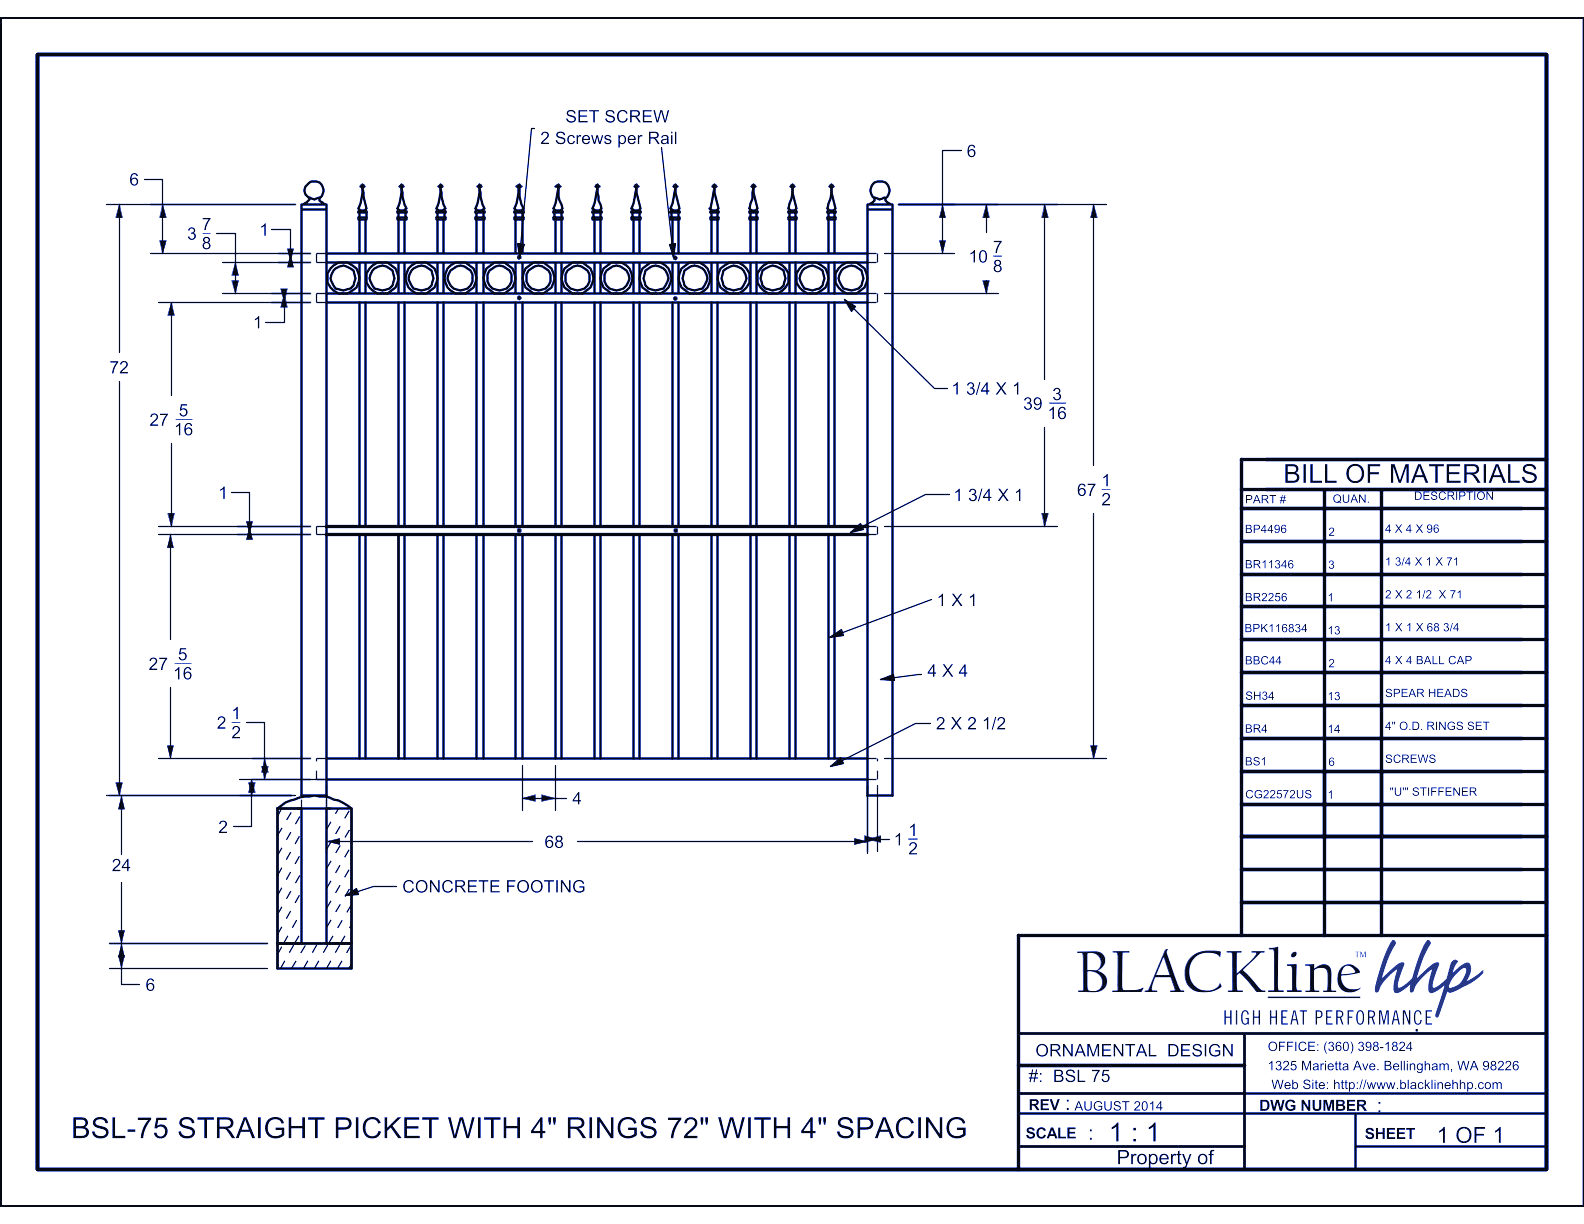 BSL-75: Straight Picket with 4" Rings 72" with 4" Spacing